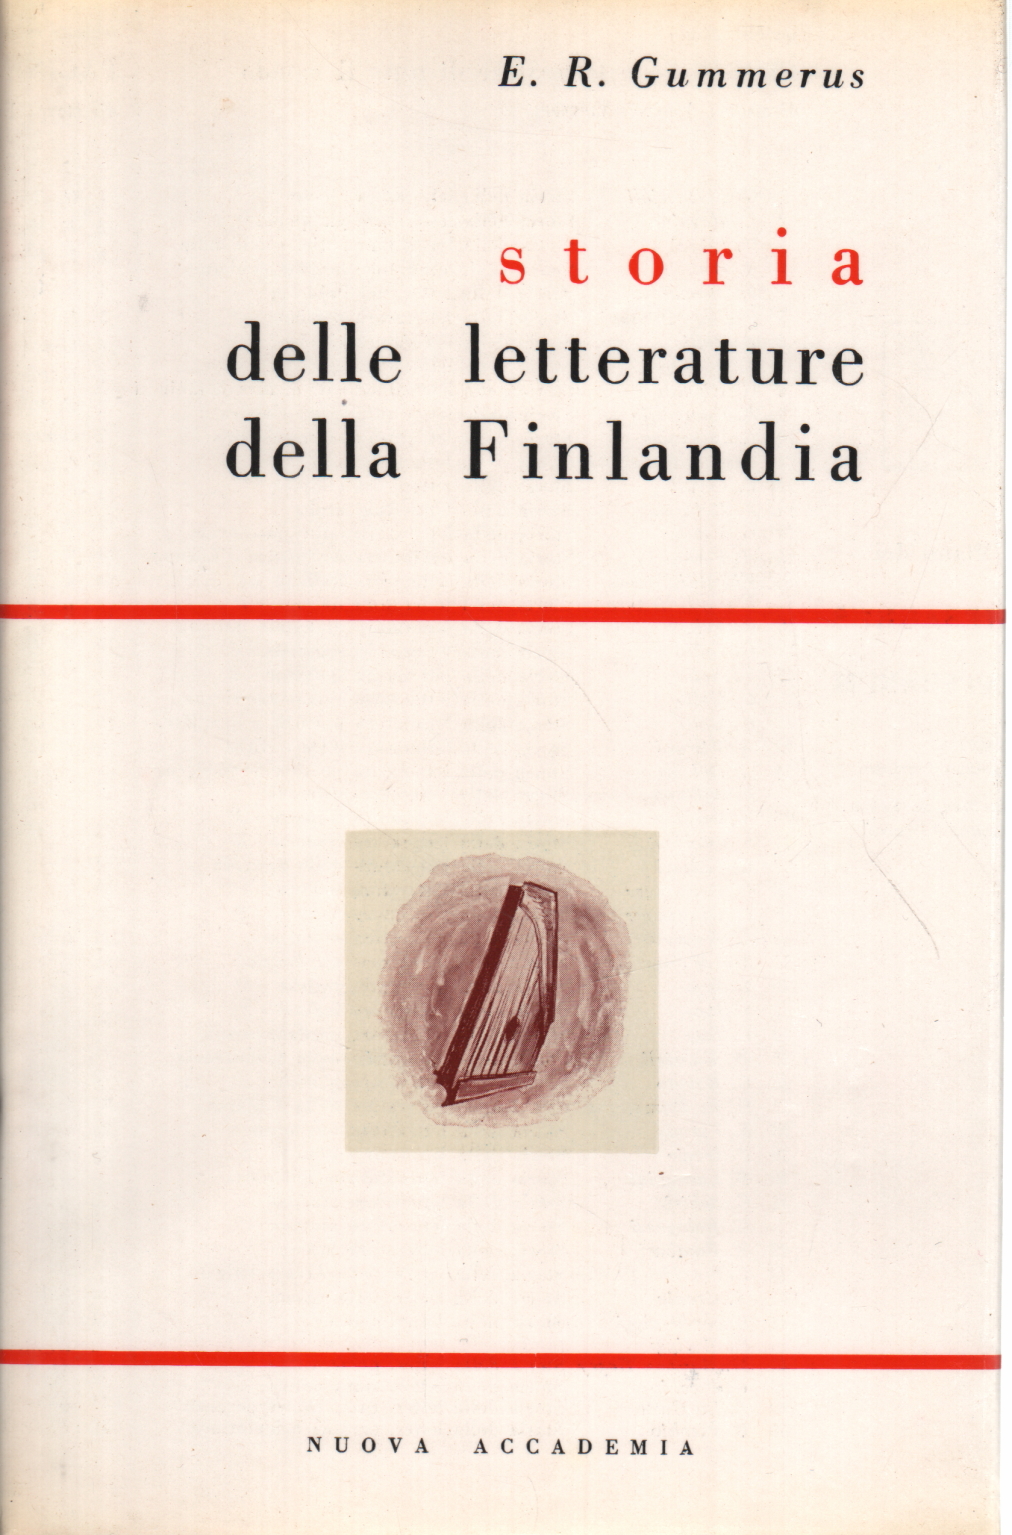 The history of the literatures of Finland, E. R. Gummerus